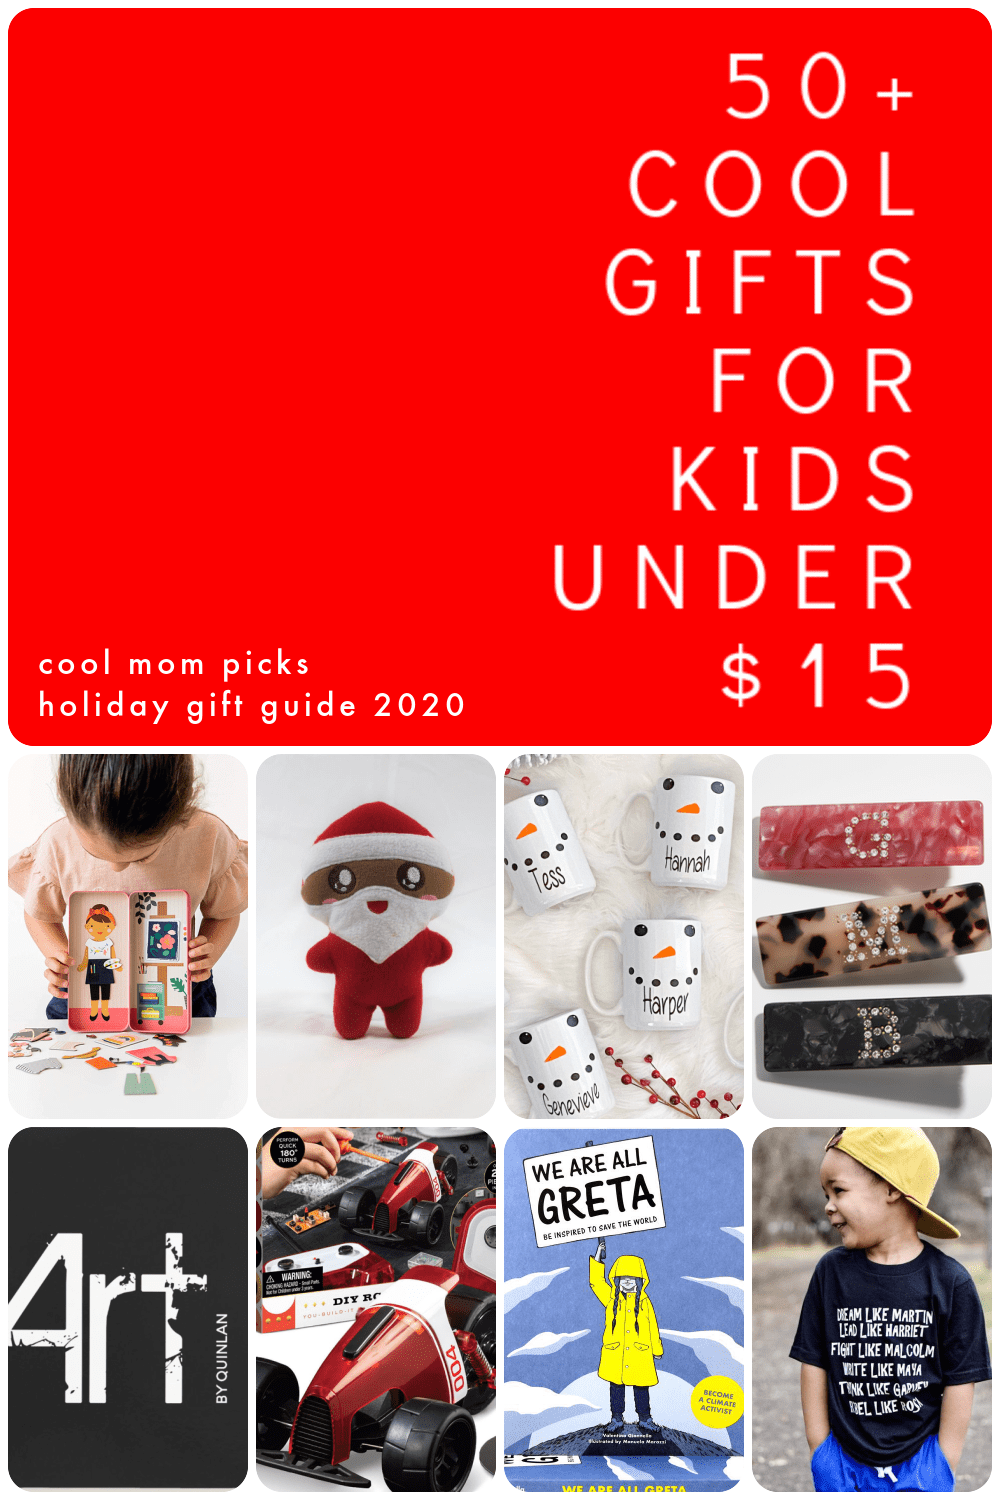 More than 50 amazing holiday gifts for kids under $15 Like, GOOD gifts